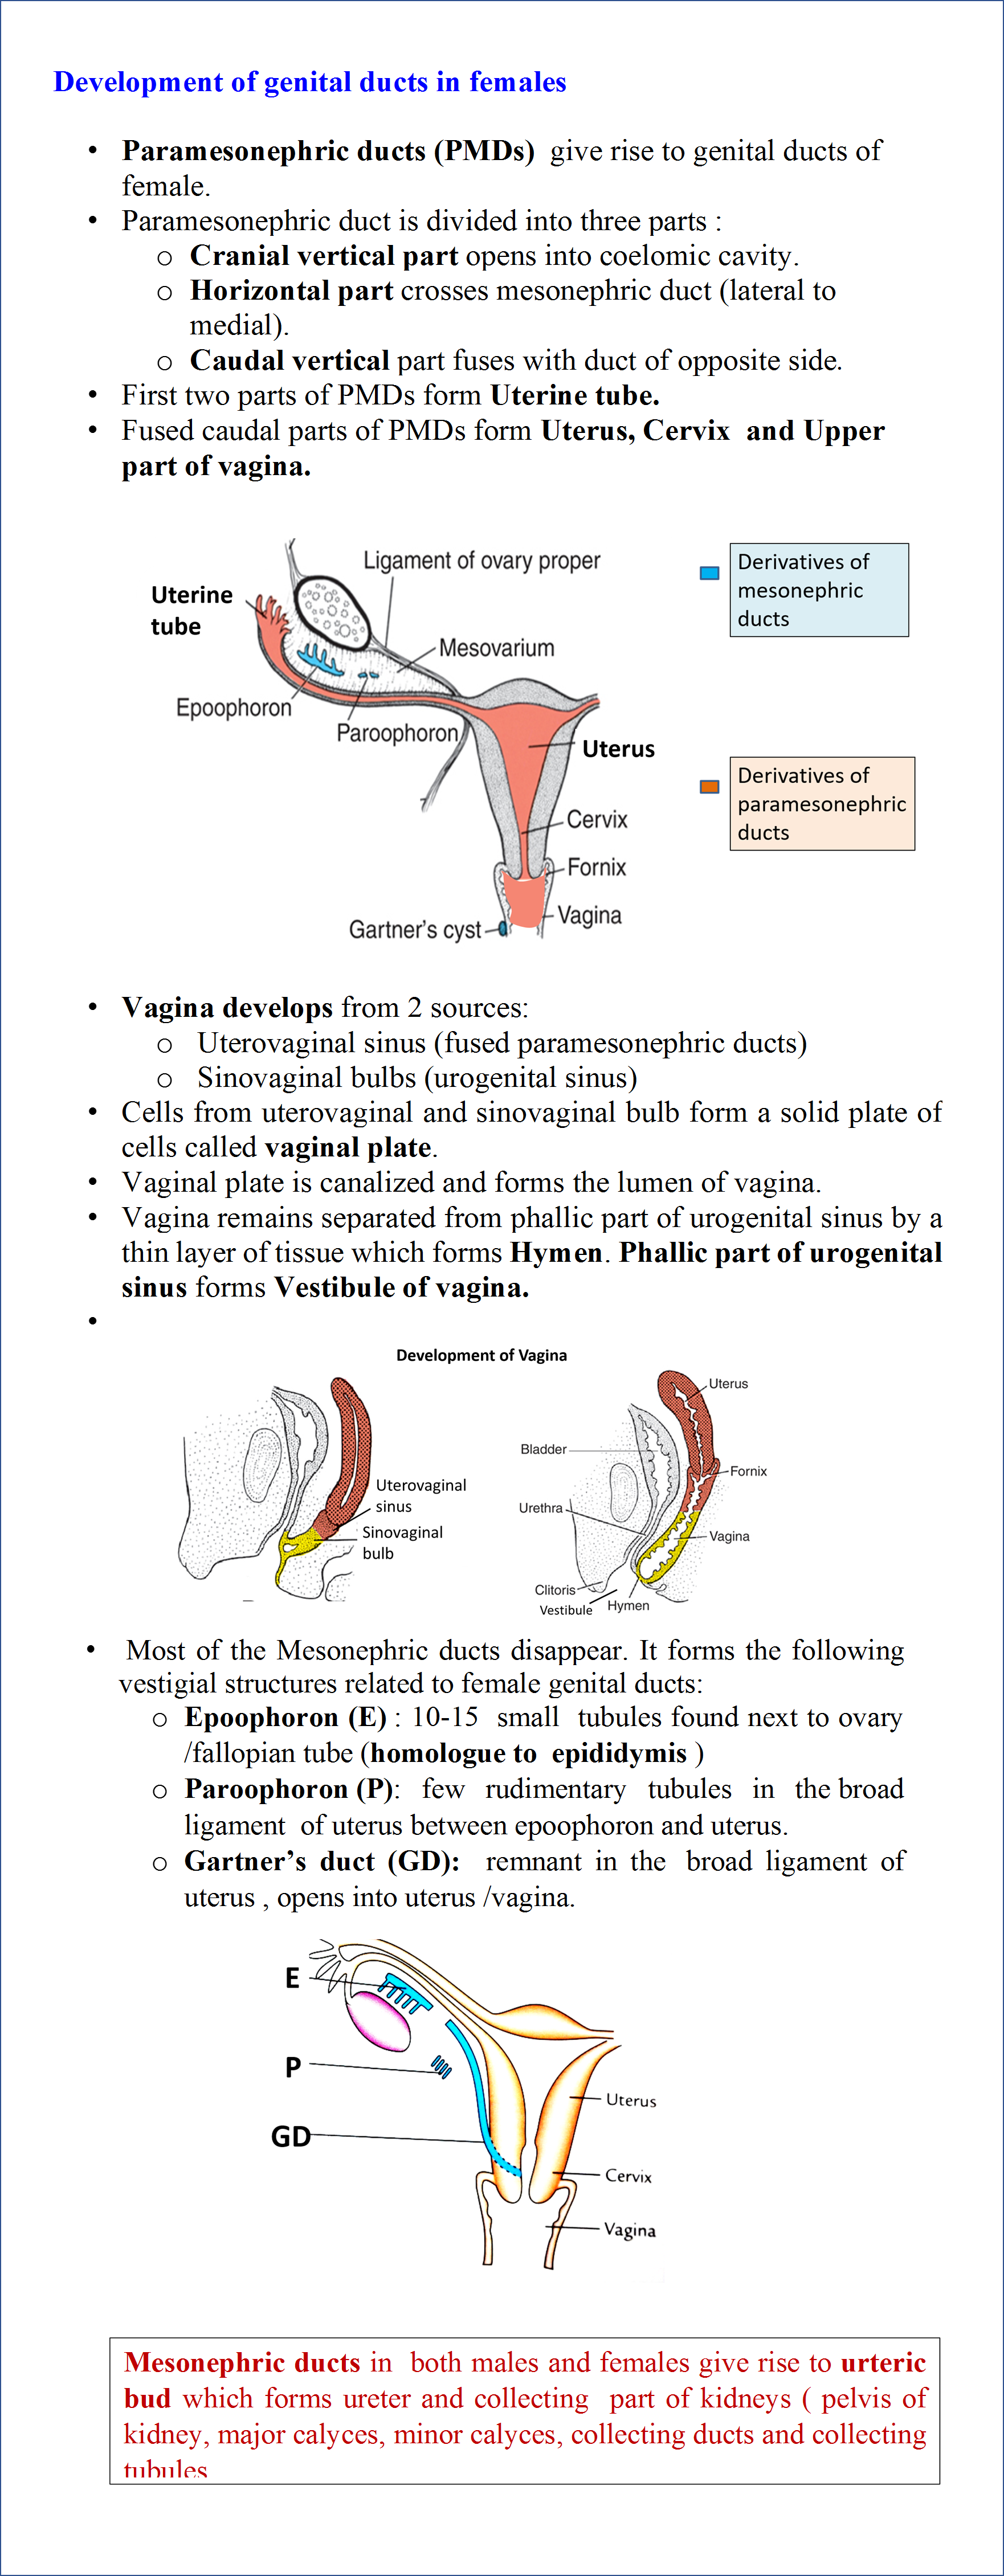 Development of genital Ducts in Females